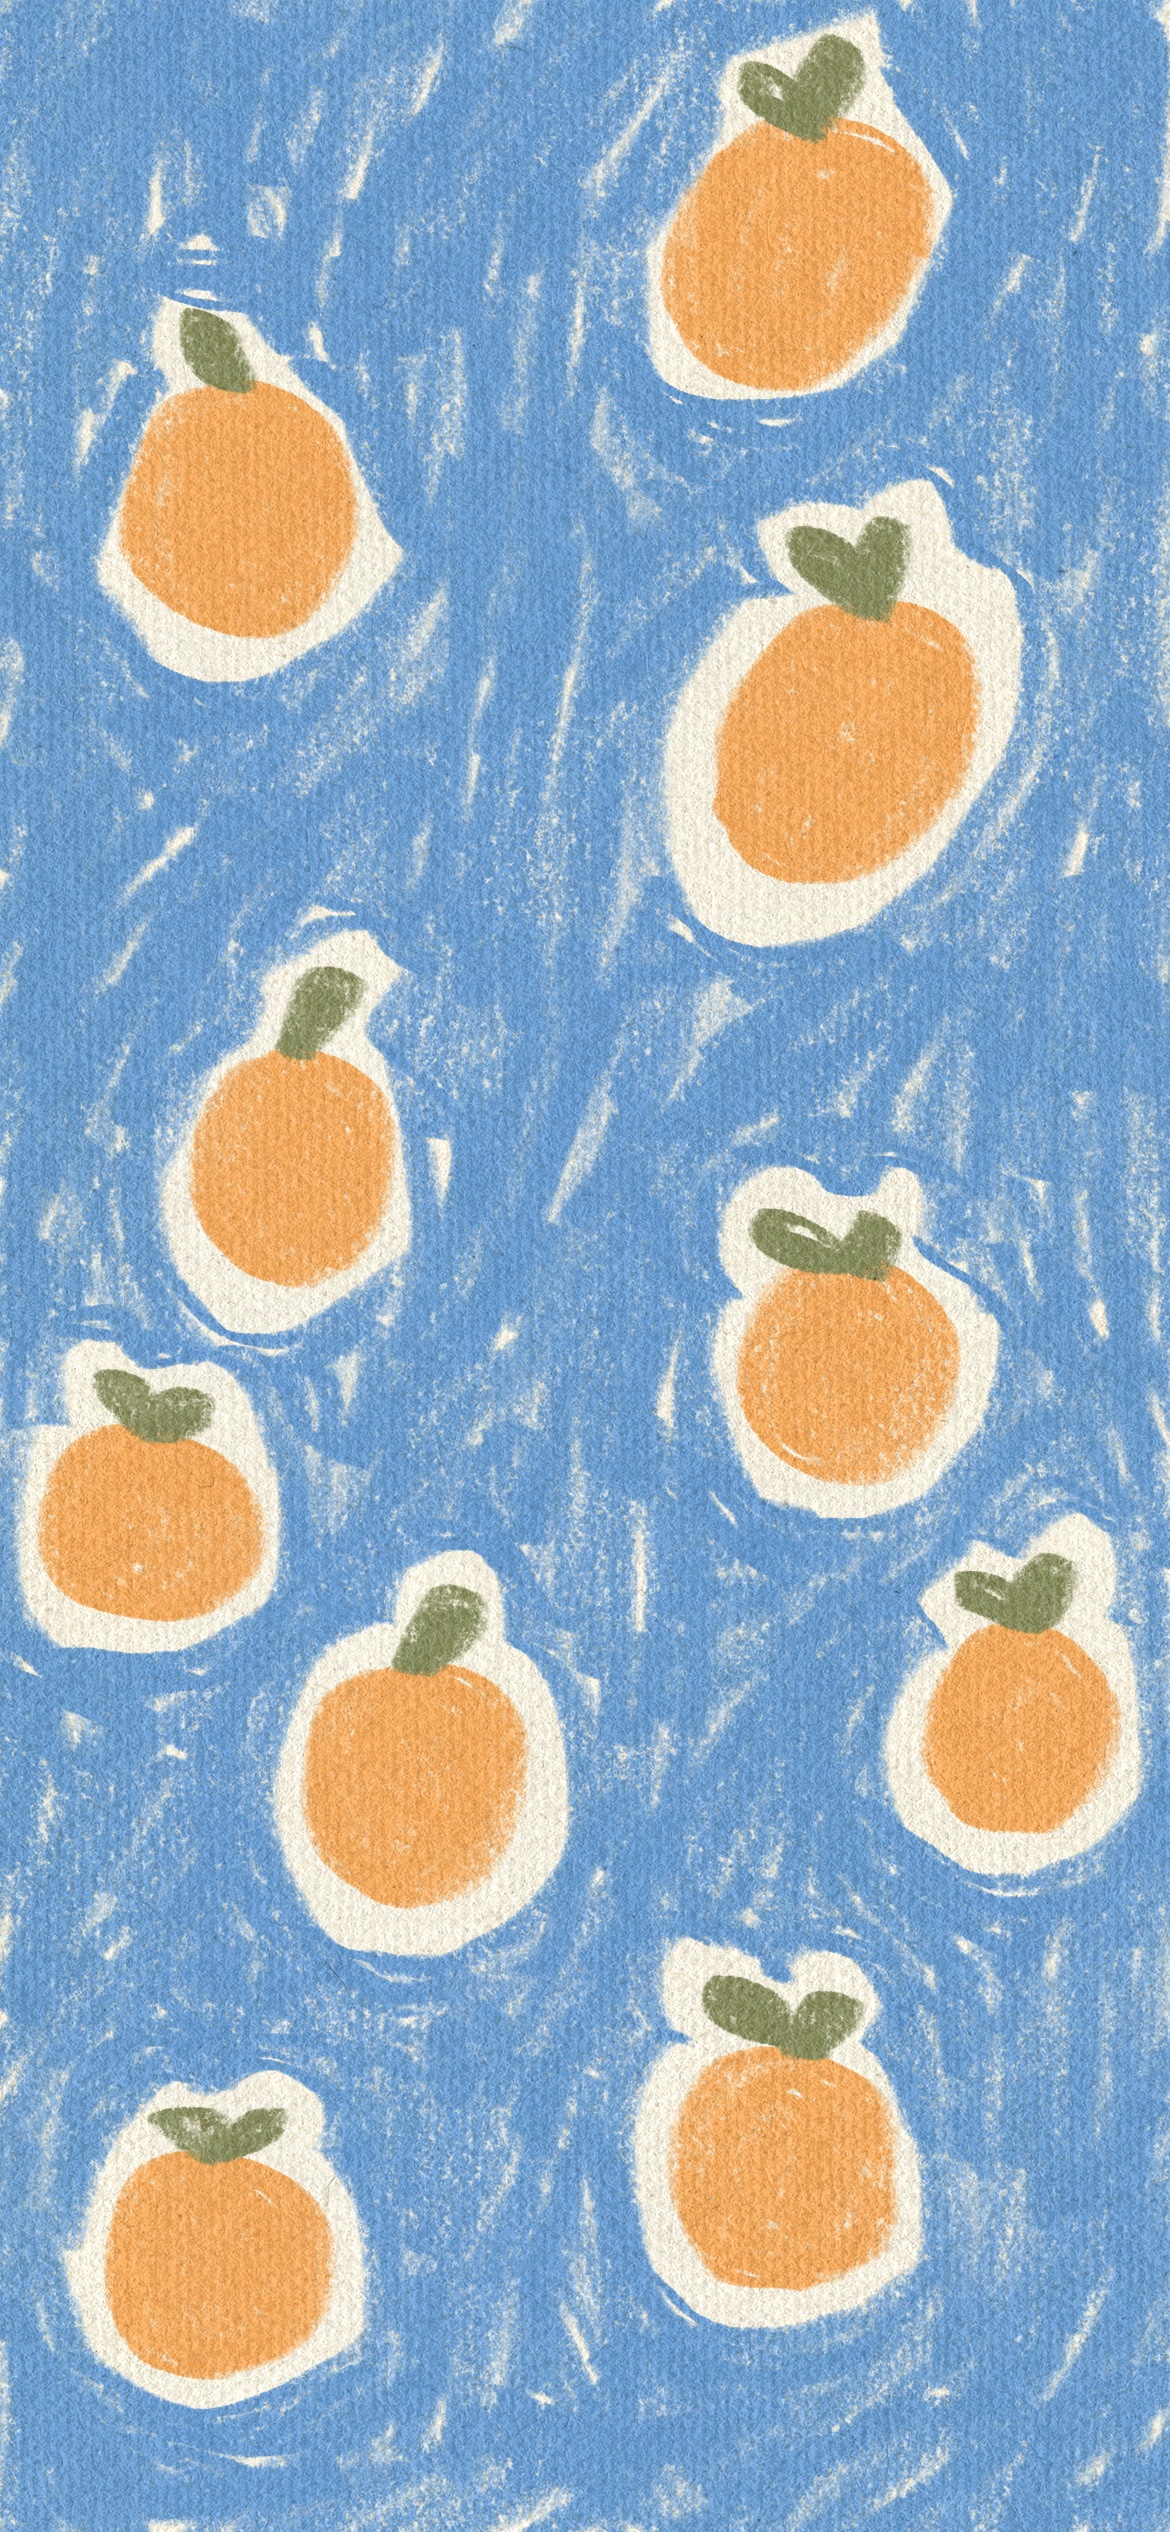 Wallpaper with oranges on blue background